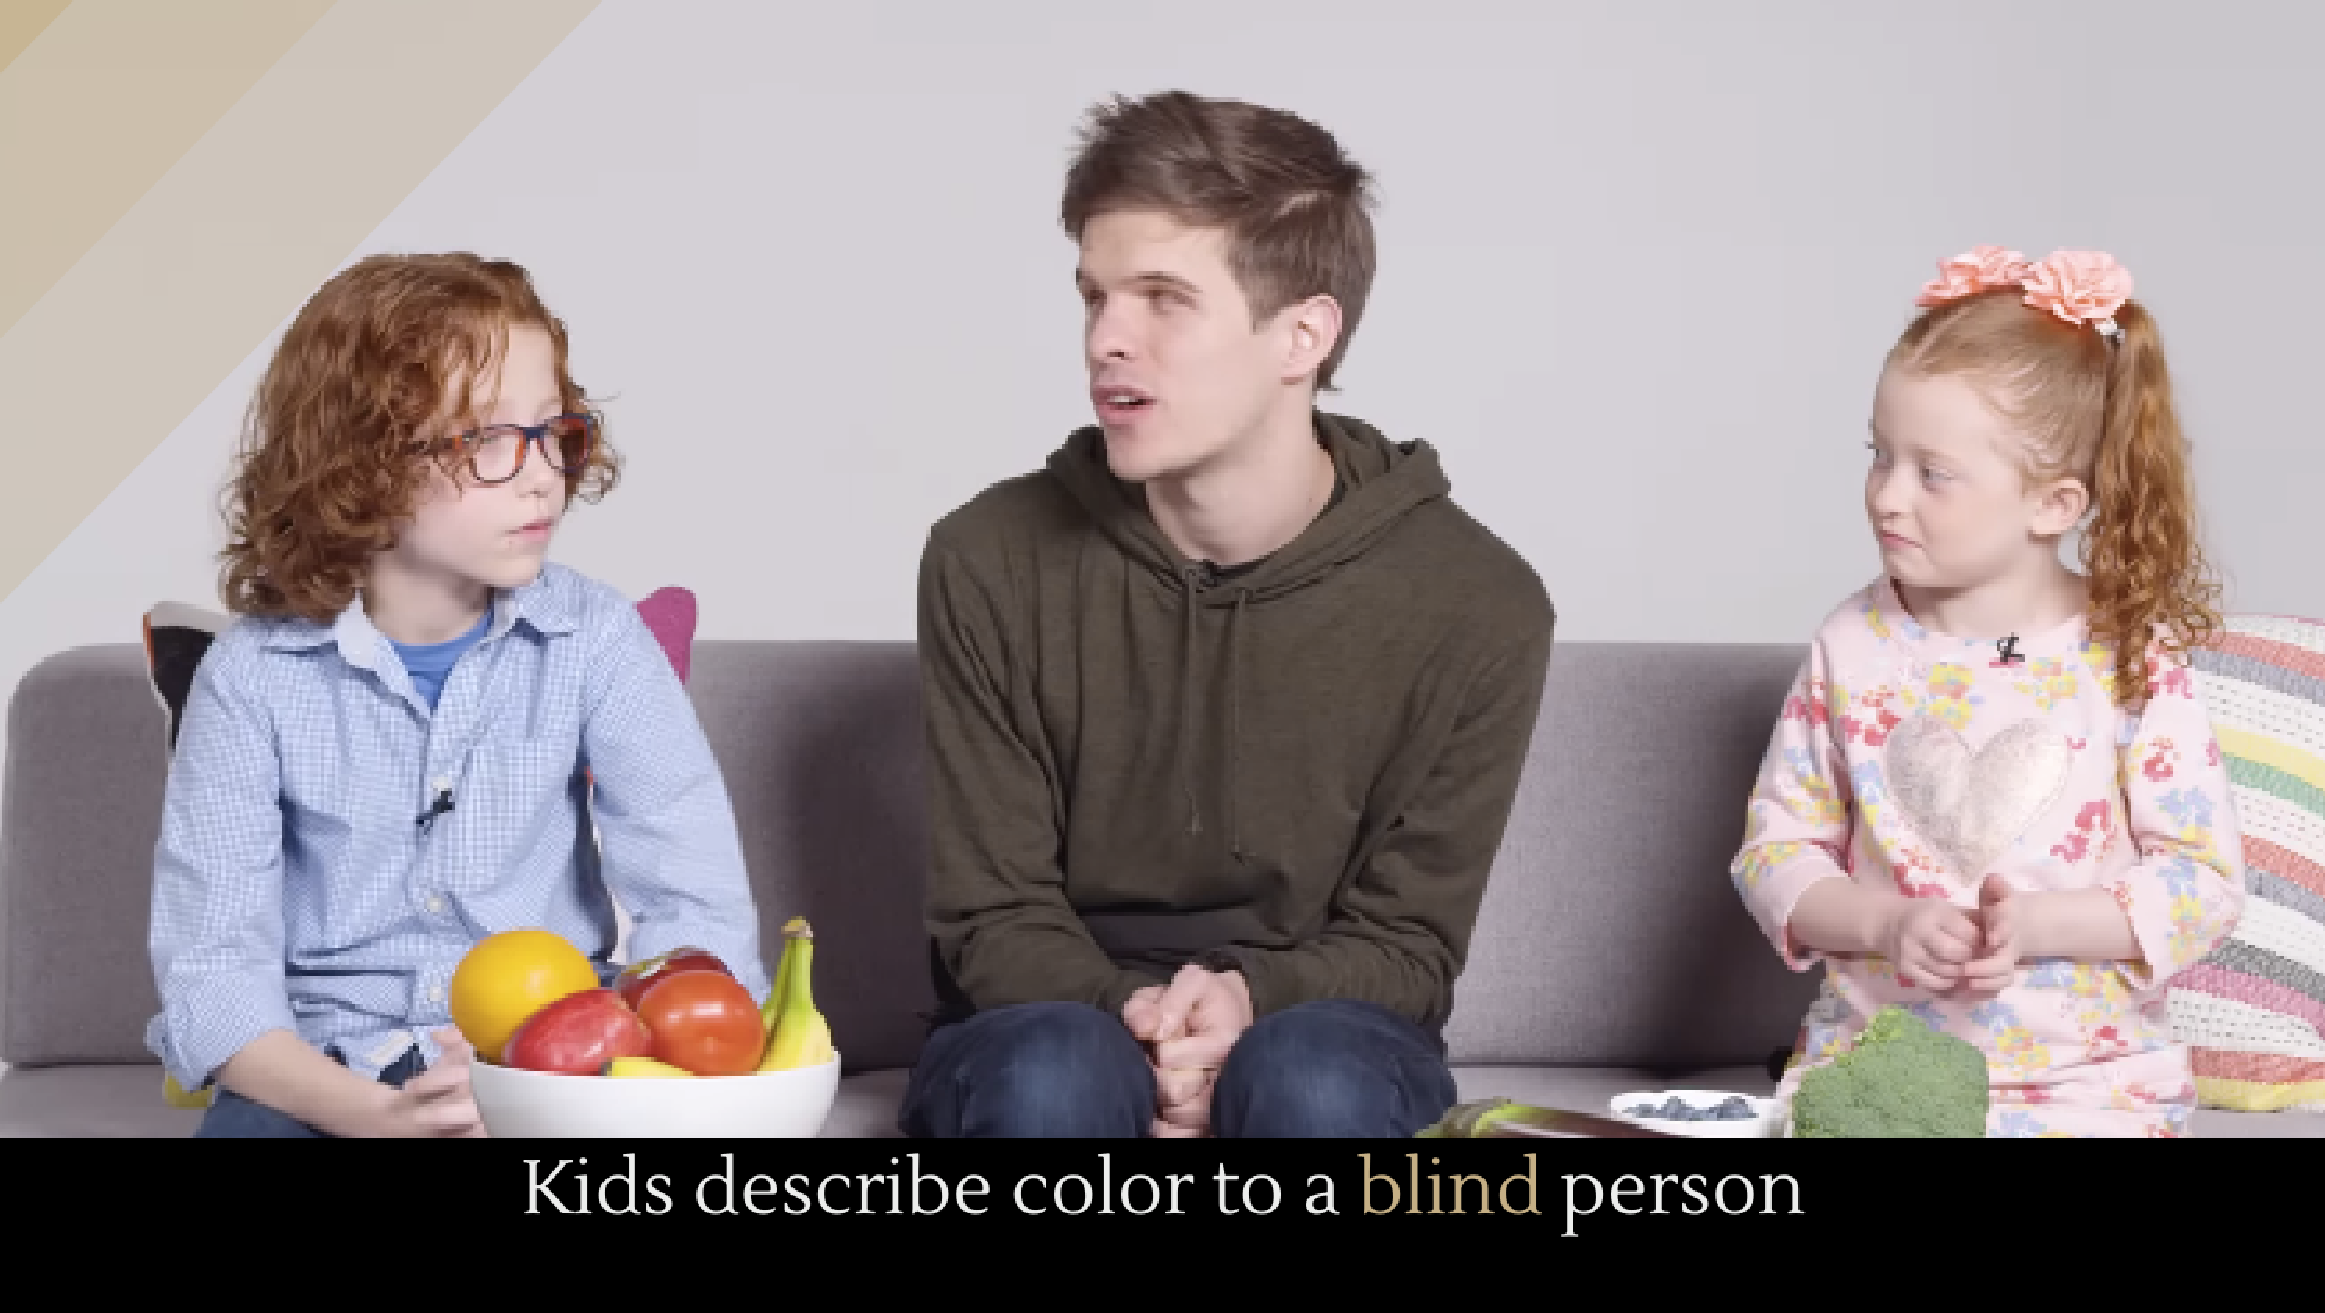 how-to-explain-color-to-a-blind-person-describe-the-color-yellow-to-a-blind-person-2019-01-17